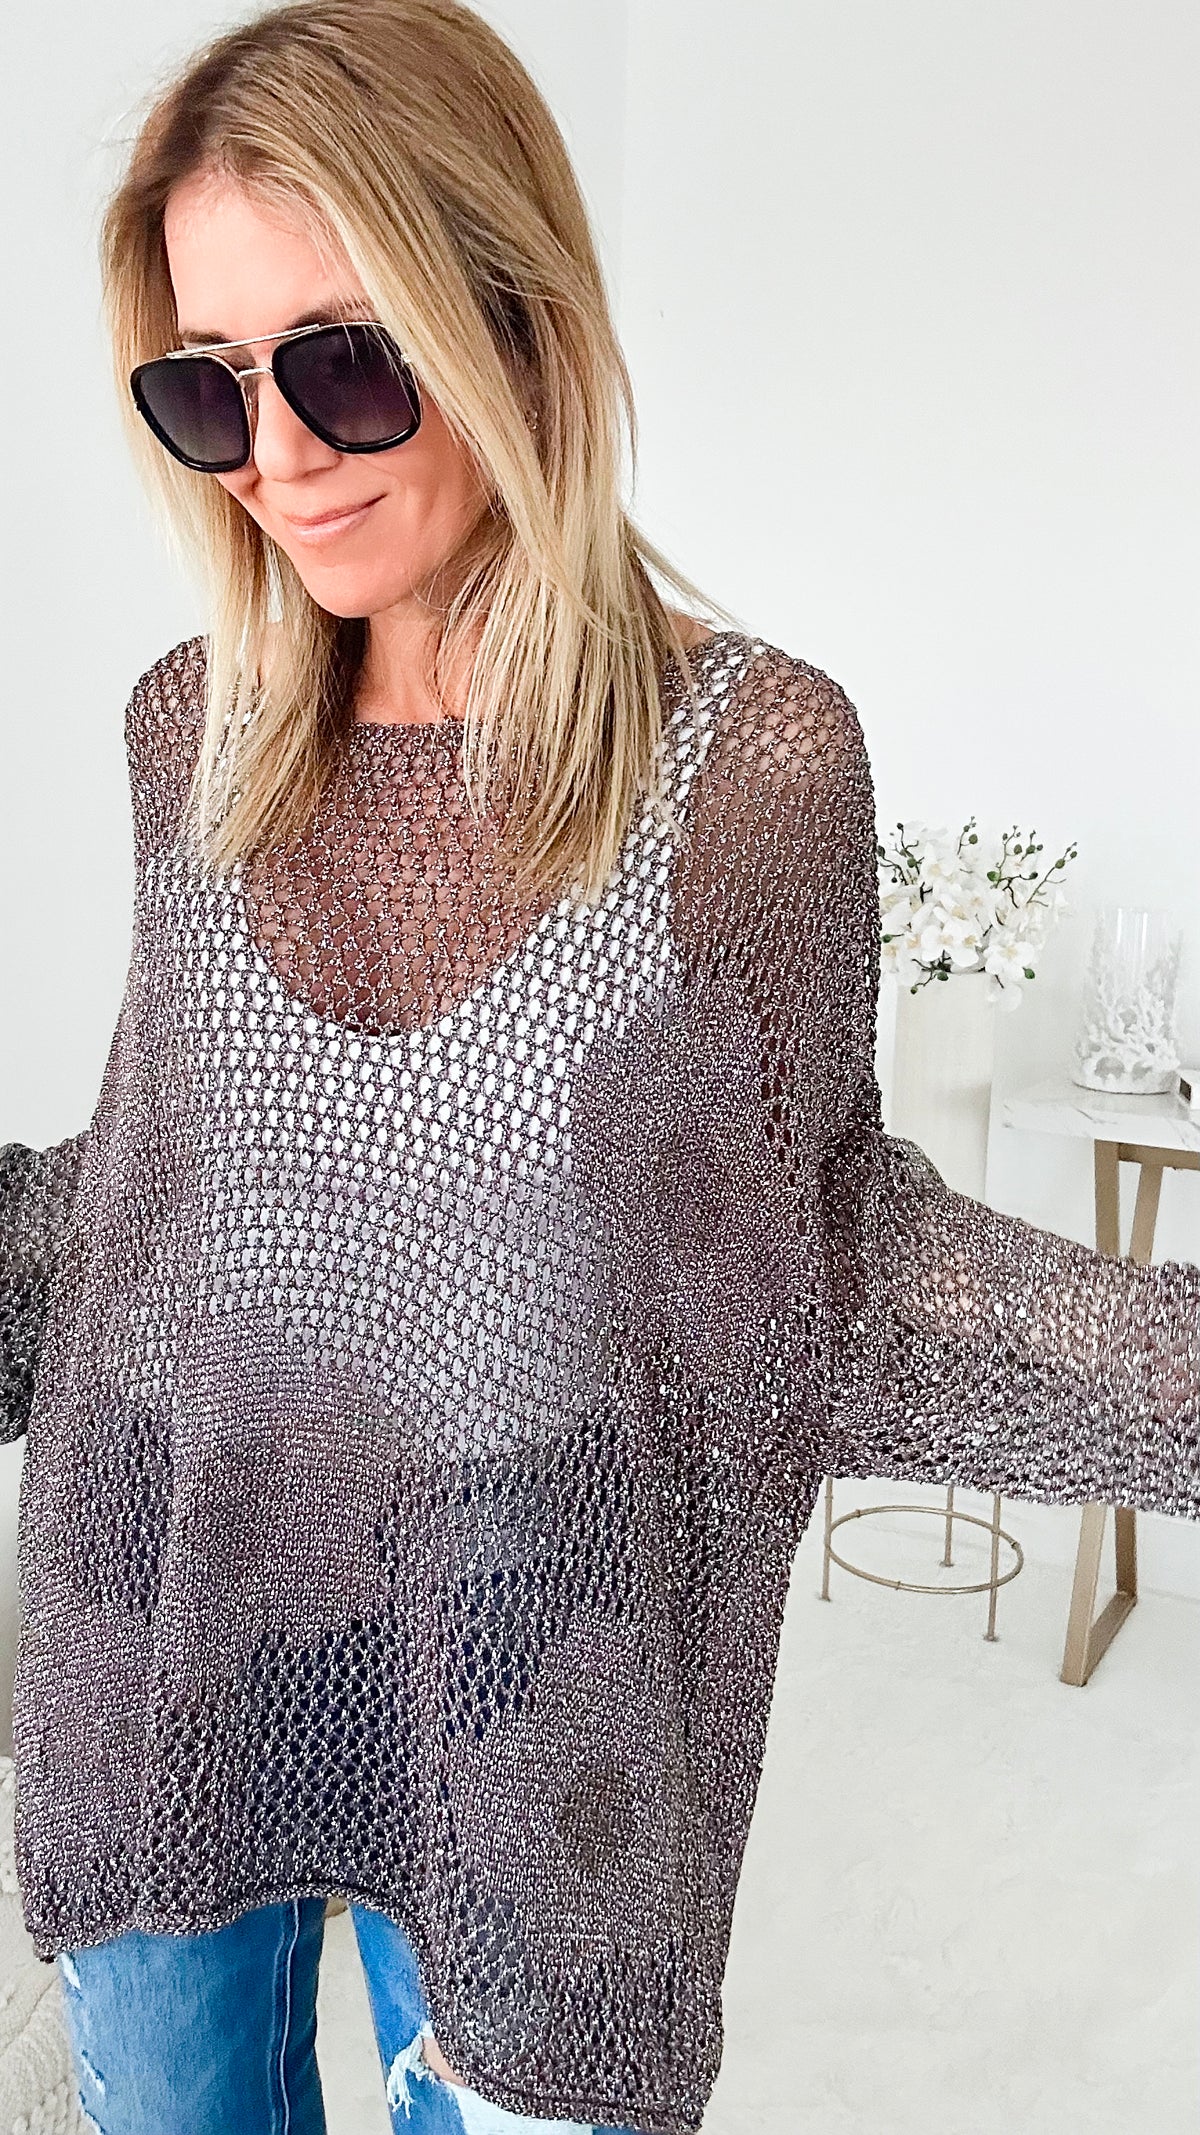 Windflower Italian Metallic Crochet Pullover - Metallic Dark Brown-140 Sweaters-Yolly-Coastal Bloom Boutique, find the trendiest versions of the popular styles and looks Located in Indialantic, FL